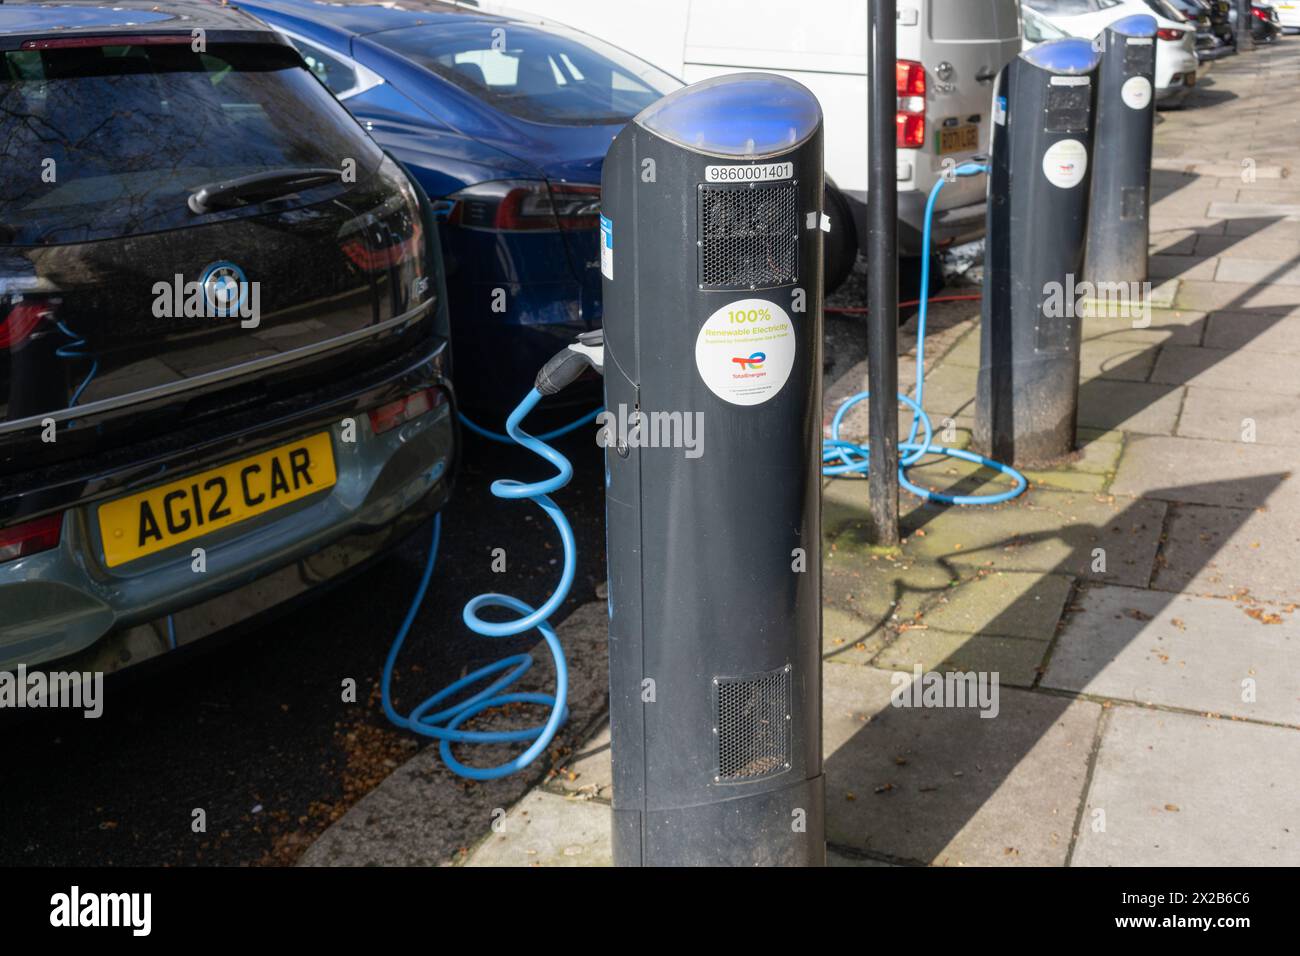 Electric cars - a BMW i3 and a Tesla plugged in and charging - at a public network EV charging station provided by Source London. London, England Stock Photo